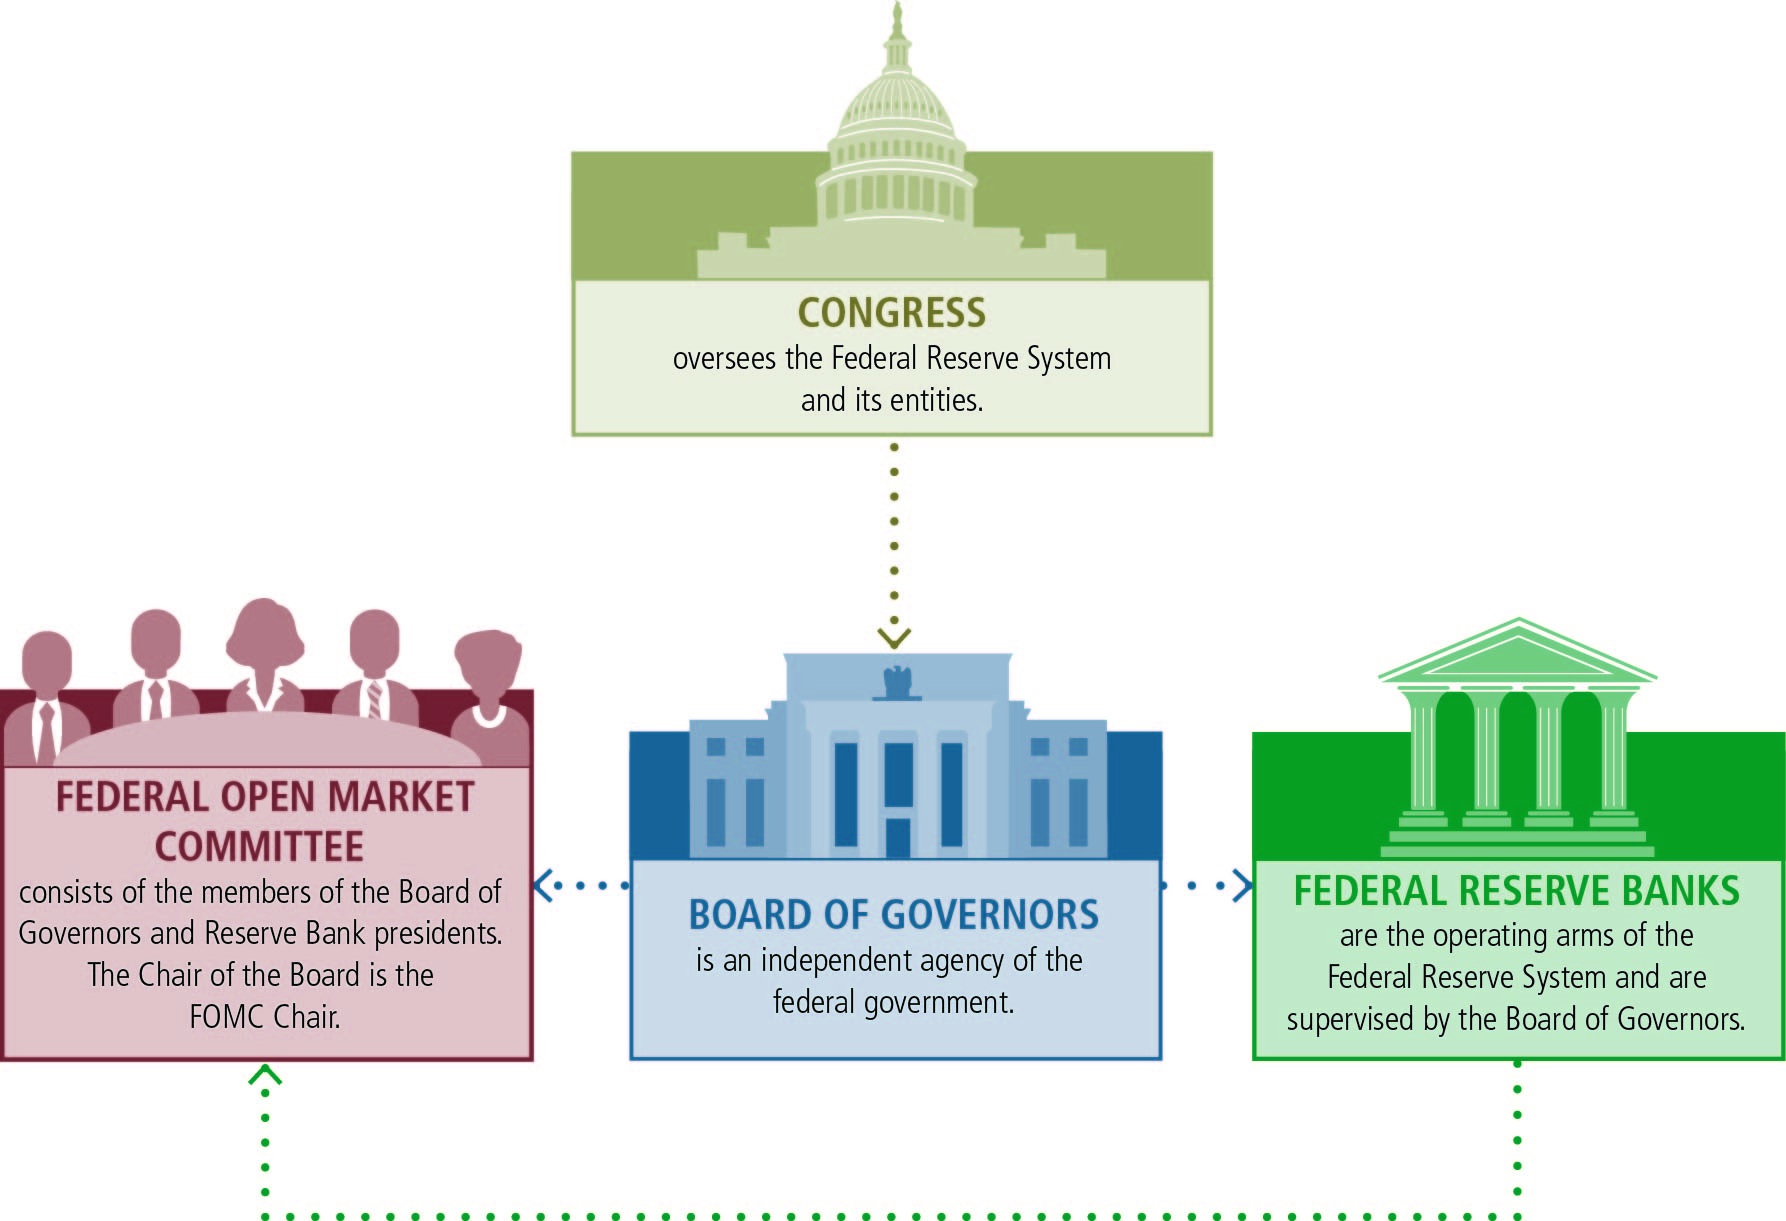 CONGRESS graphic positioned above the three key Federal Reserve entities' graphics: 'CONGRESS oversees the Federal Reserve System and its entities.' A dotted arrow leads down to the BOARD graphic: 'BOARD OF GOVERNORS is an independent agency of the federal government.' A dotted arrow leads right from the BOARD graphic to the BANKS graphic: 'FEDERAL RESERVE BANKS are the operating arms of the Federal Reserve System and are supervised by the Board of Governors.' Dotted arrows lead left from the BOARD and BANKS graphics to the FOMC graphic: 'FEDERAL OPEN MARKET COMMITTEE consists of the members of the Board of Governors and Reserve Bank presidents. The Chair of the Board is the FOMC Chair.